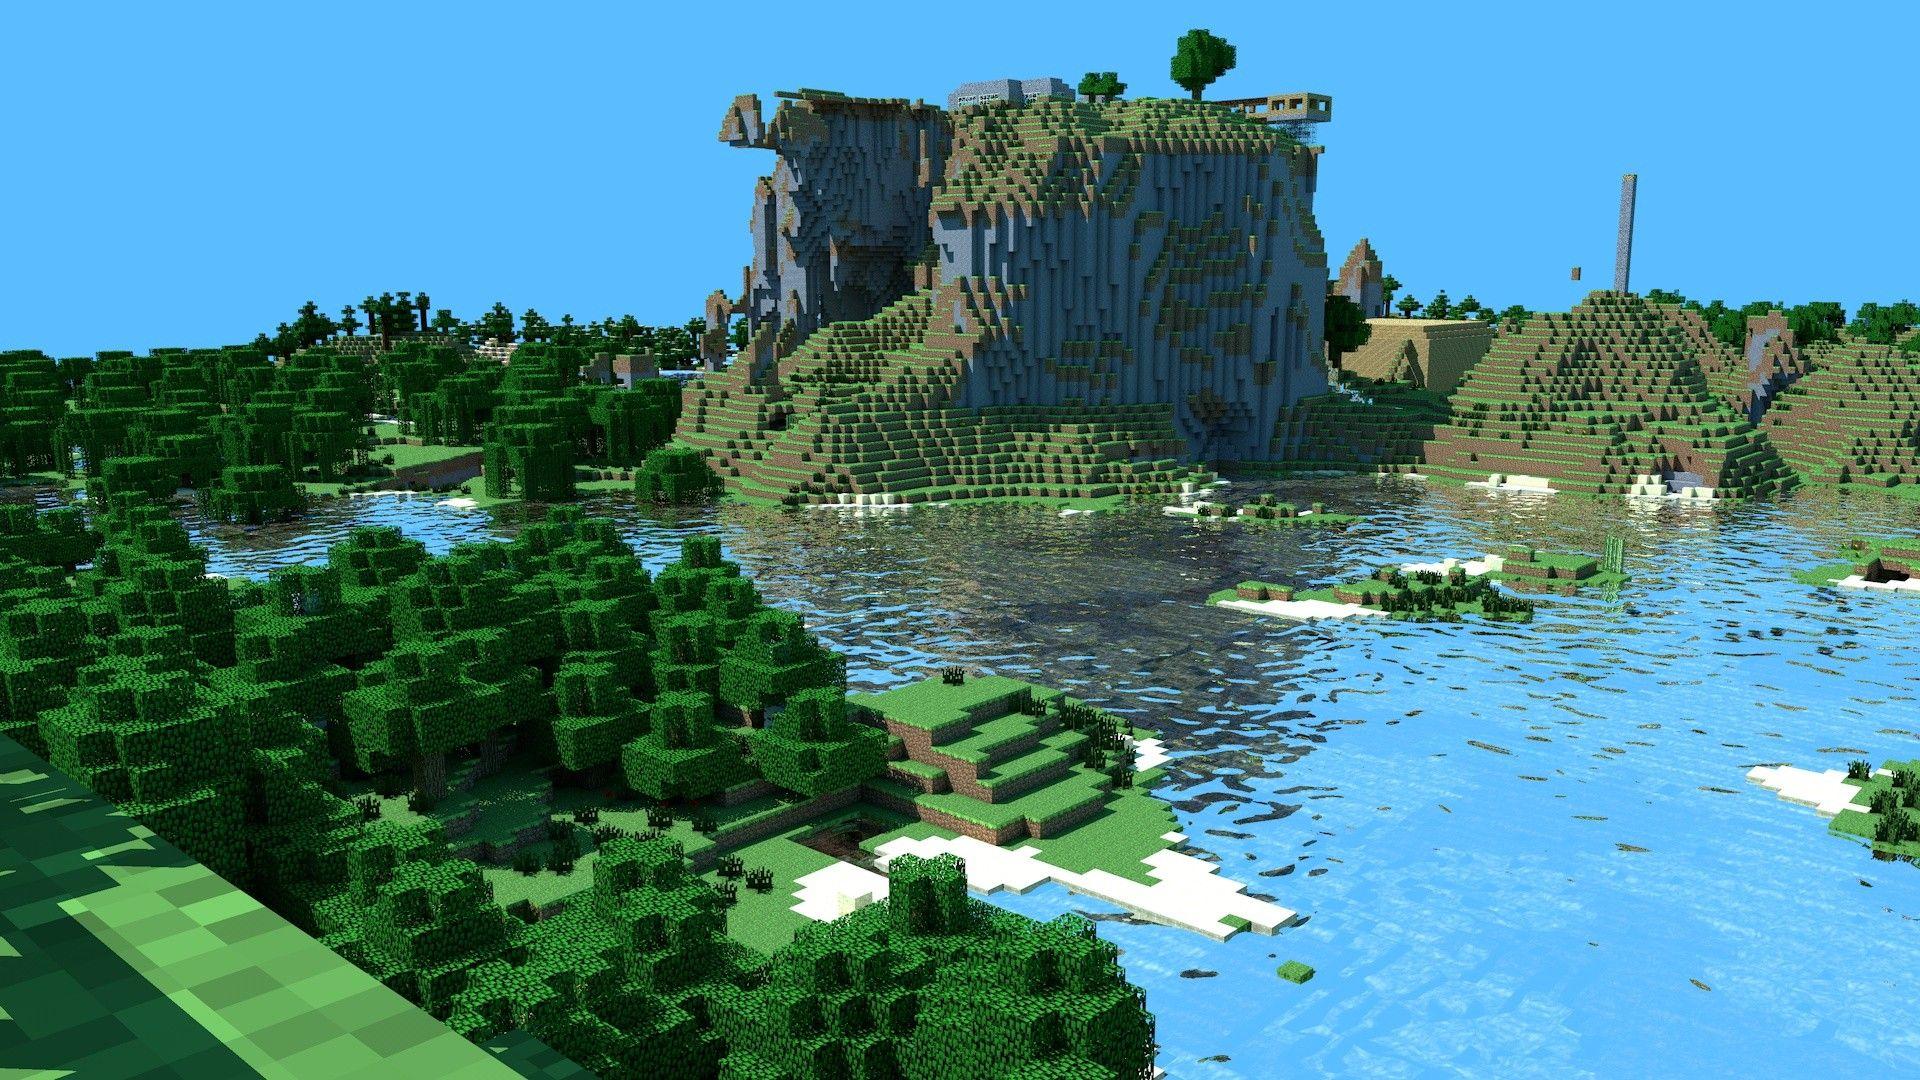 Wallpaper.wiki Wonderful Minecraft Picture PIC WPE008101